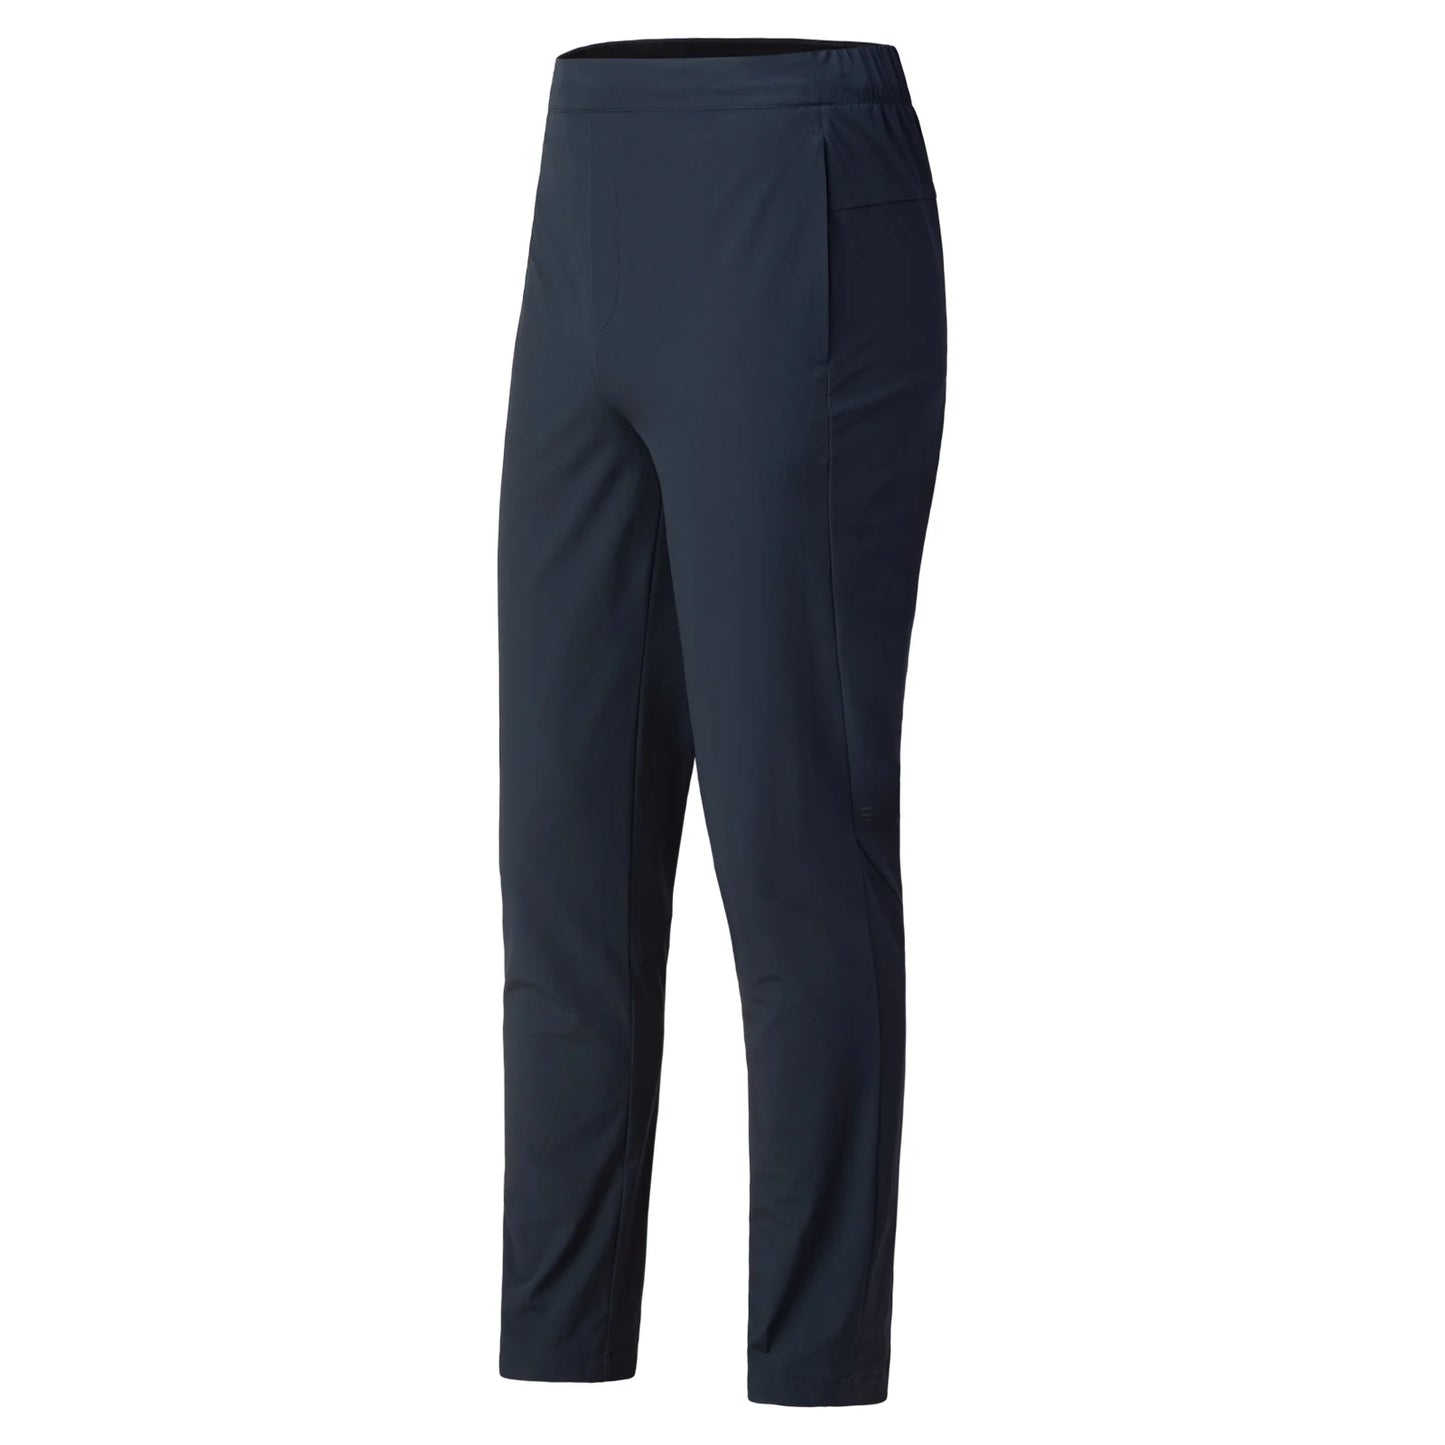 AONIJIE - Quick Dry Sports Pants - Breathable Lightweight - FM5202